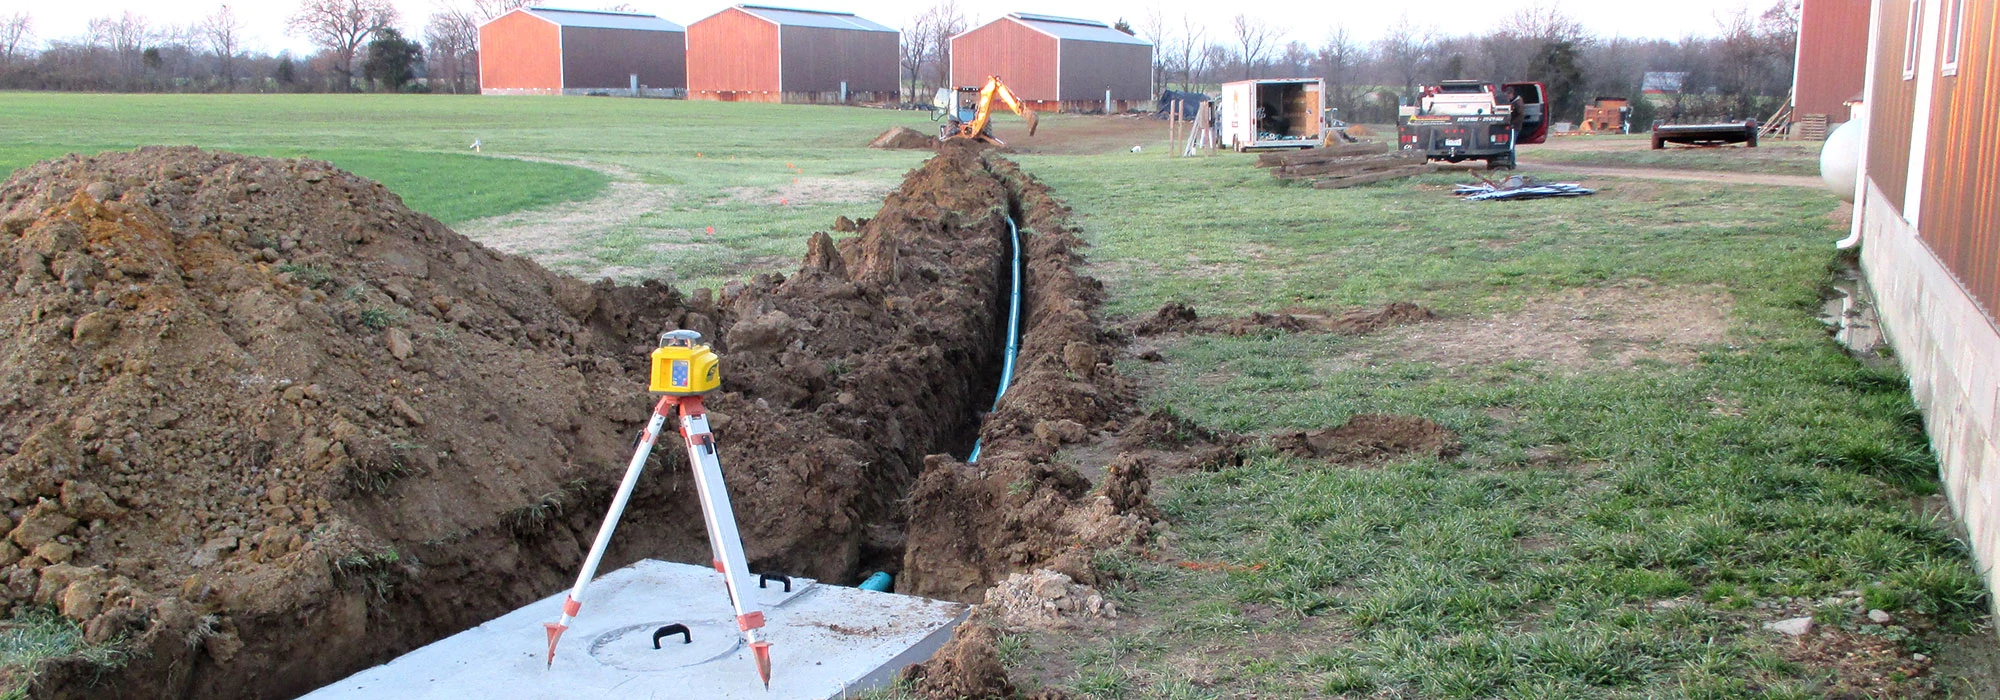 Septic Line in Yard